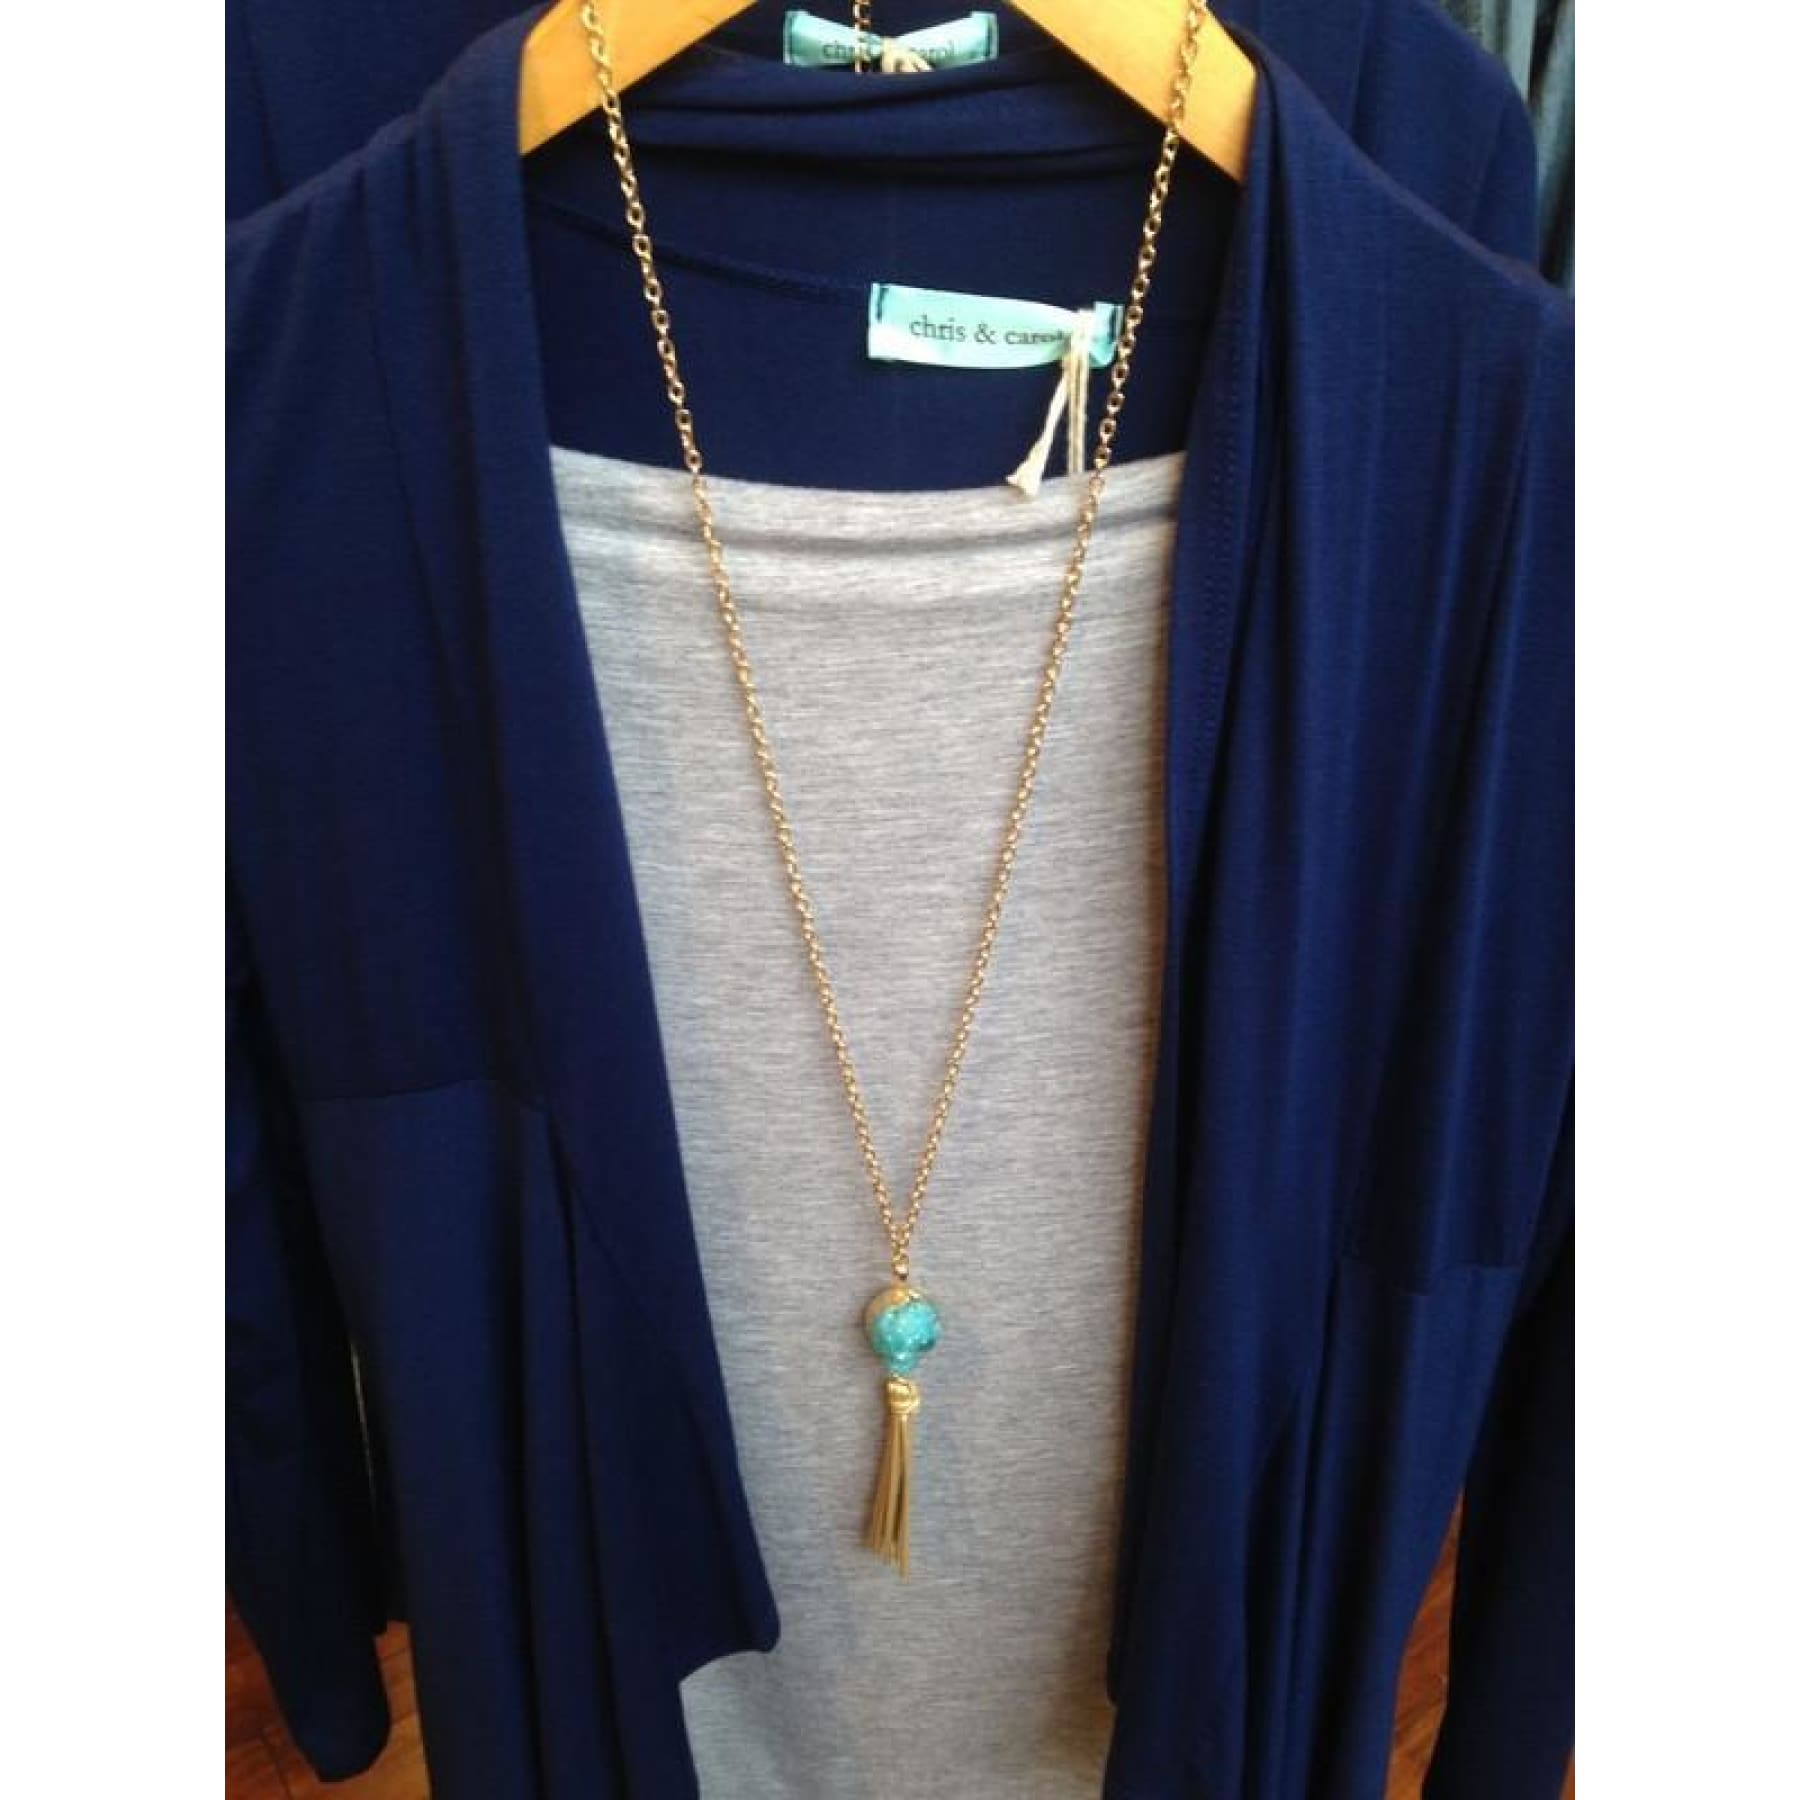 Gold Blue Druzy Crystal With Gold Leather Tassel Necklace,Necklace - Dirt Road Divas Boutique